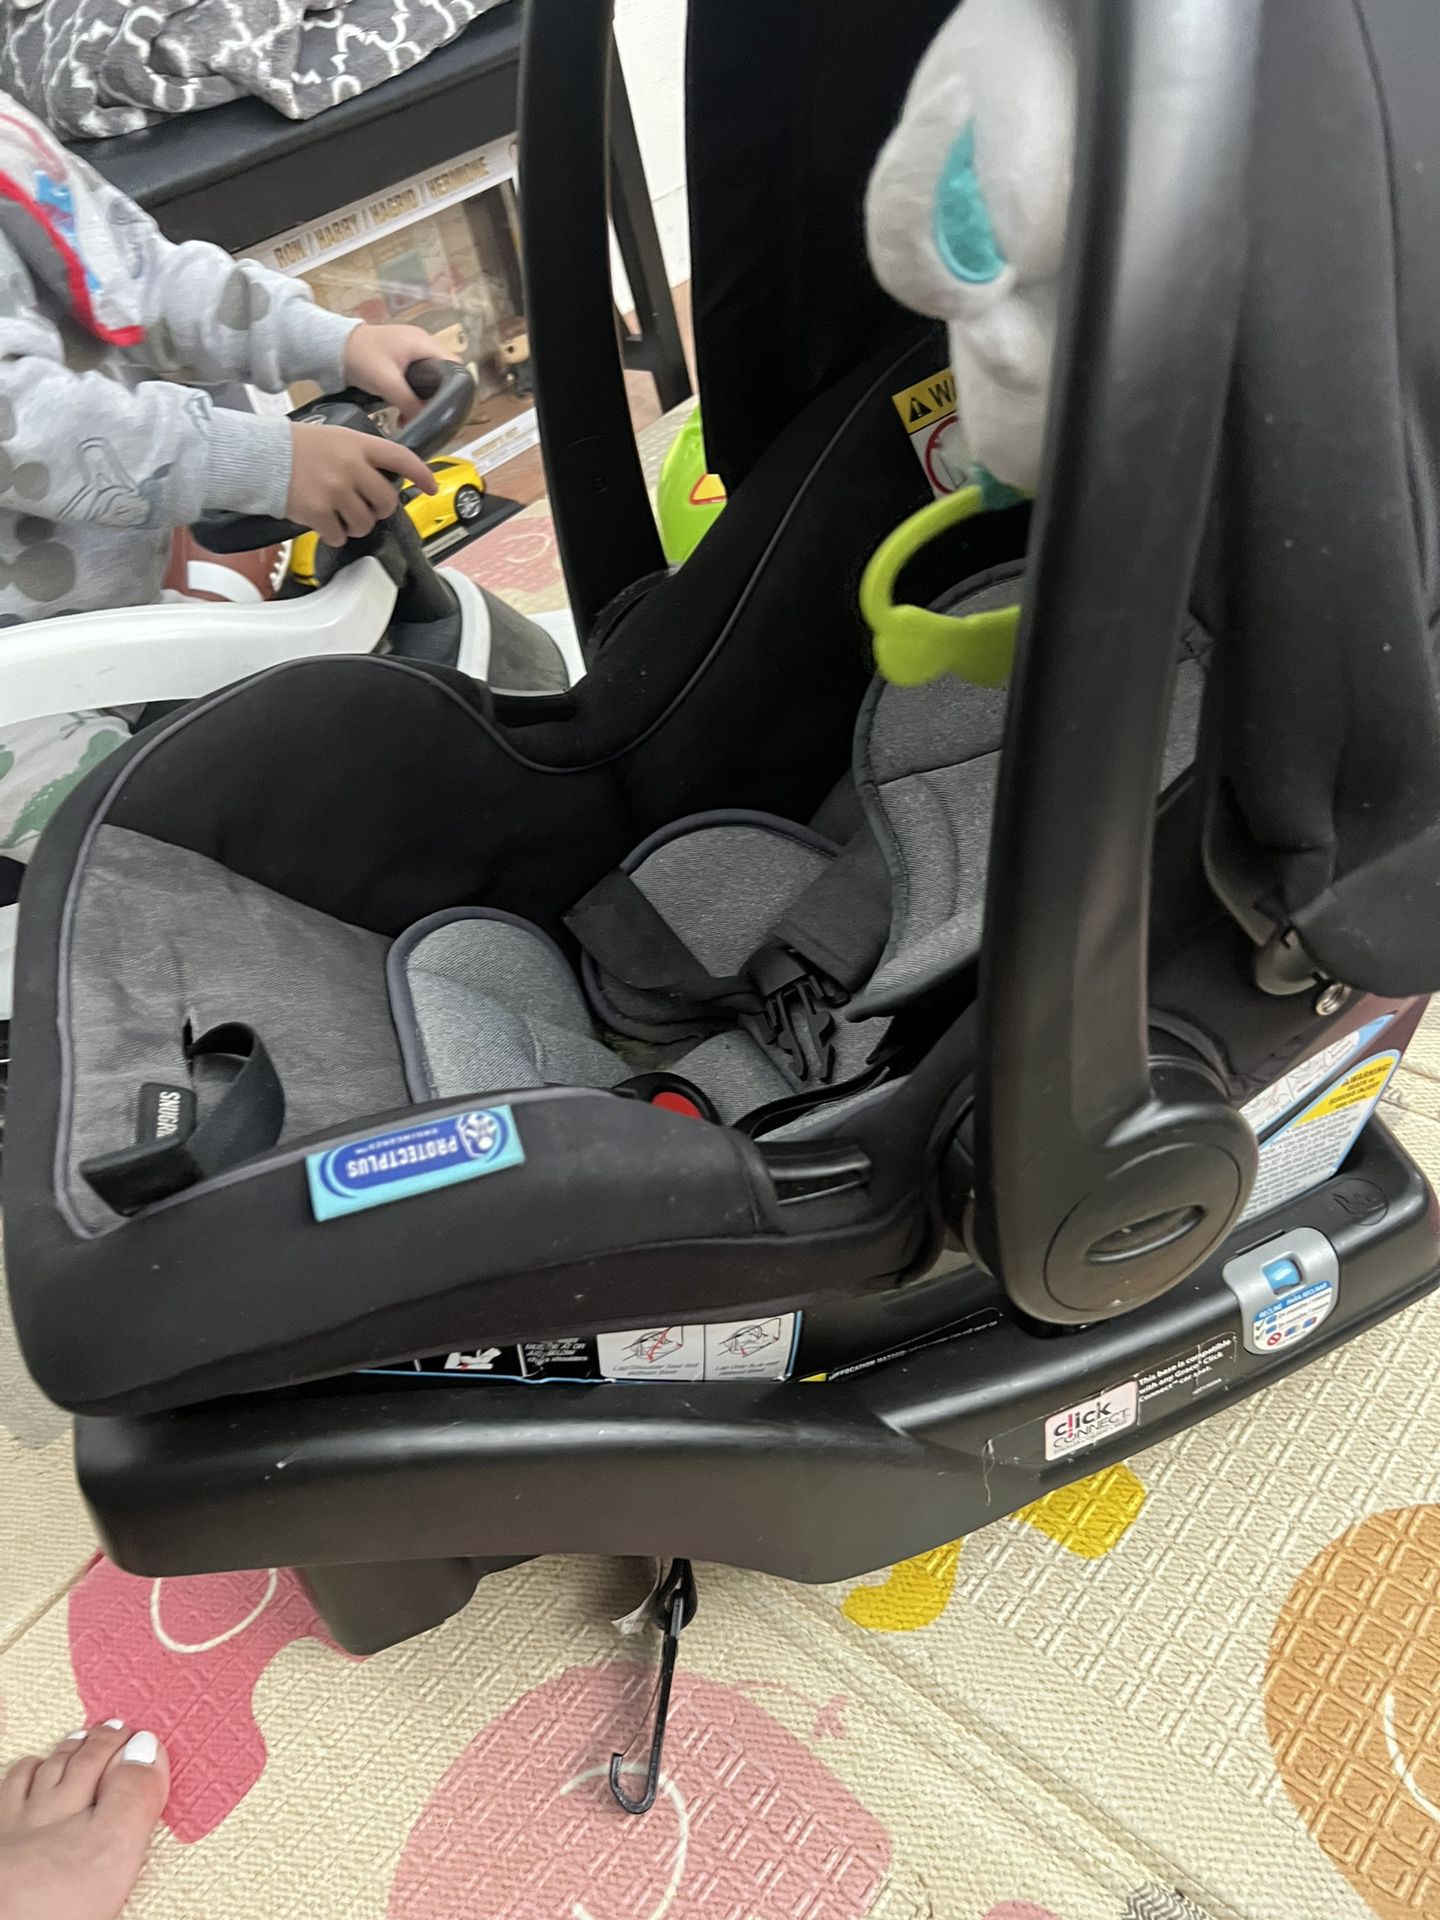 Graco Infant Car Seat And 2 Base 